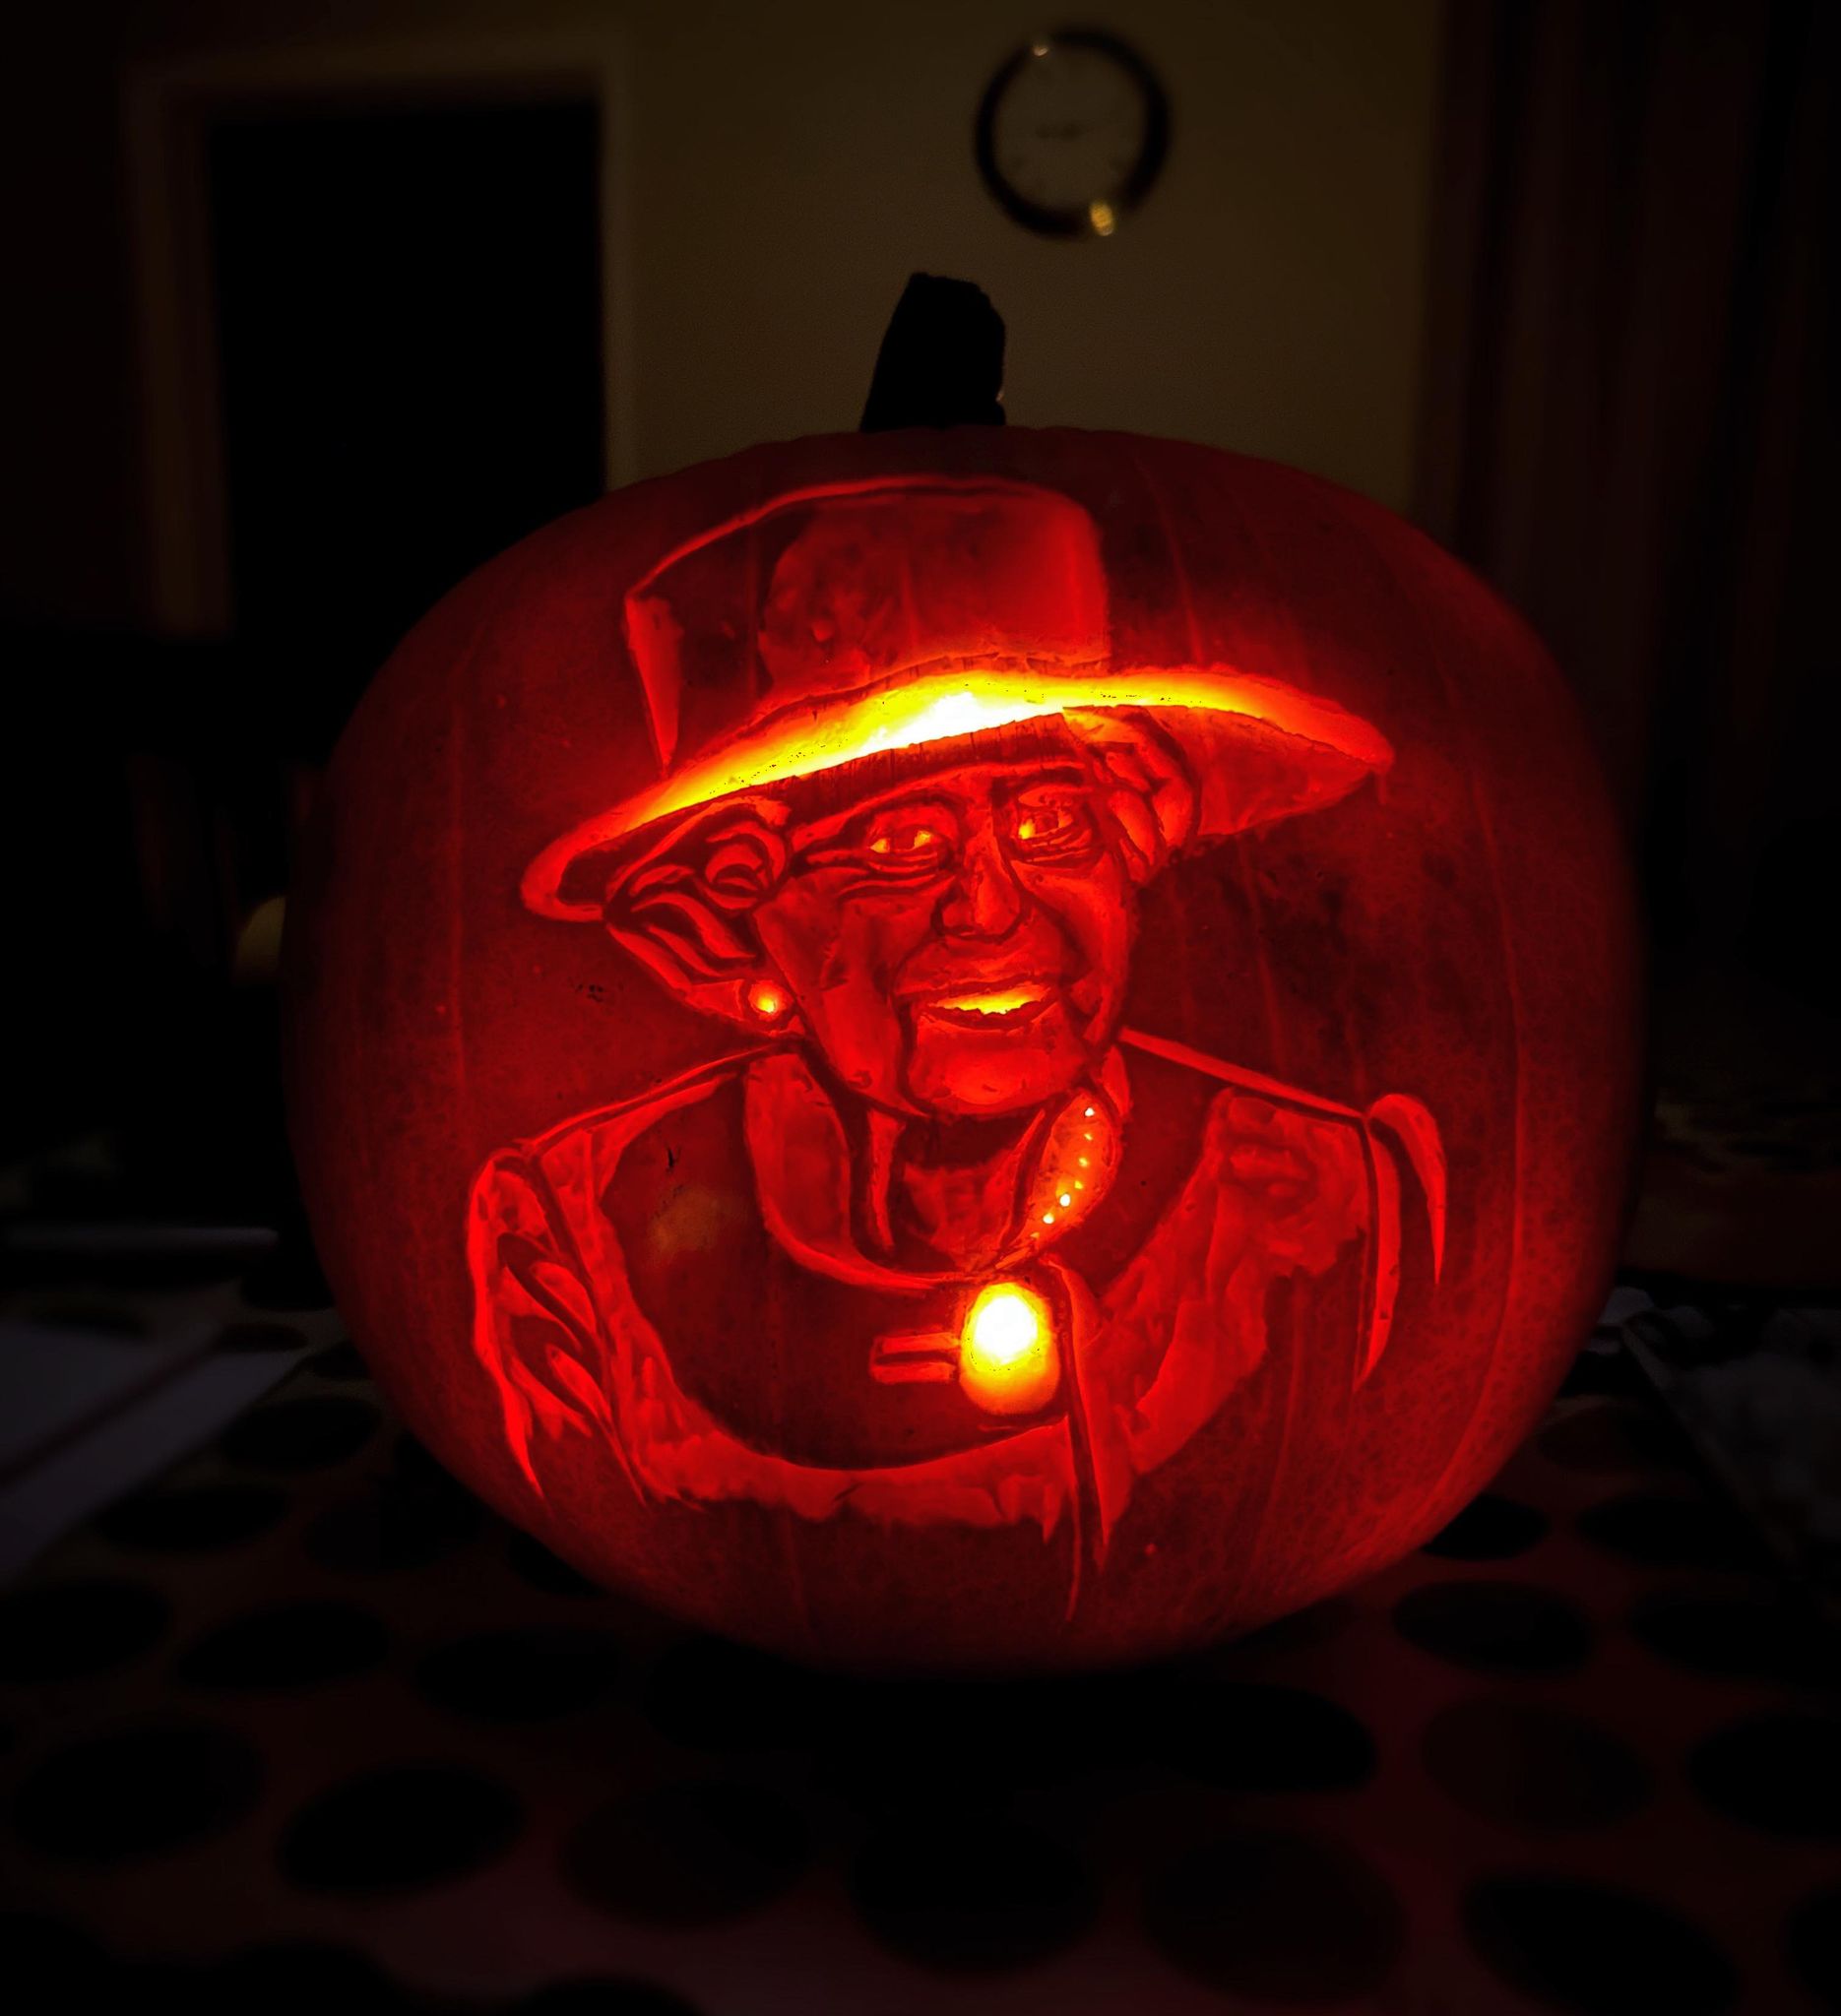 a pumpkin carved out with the Queen's image